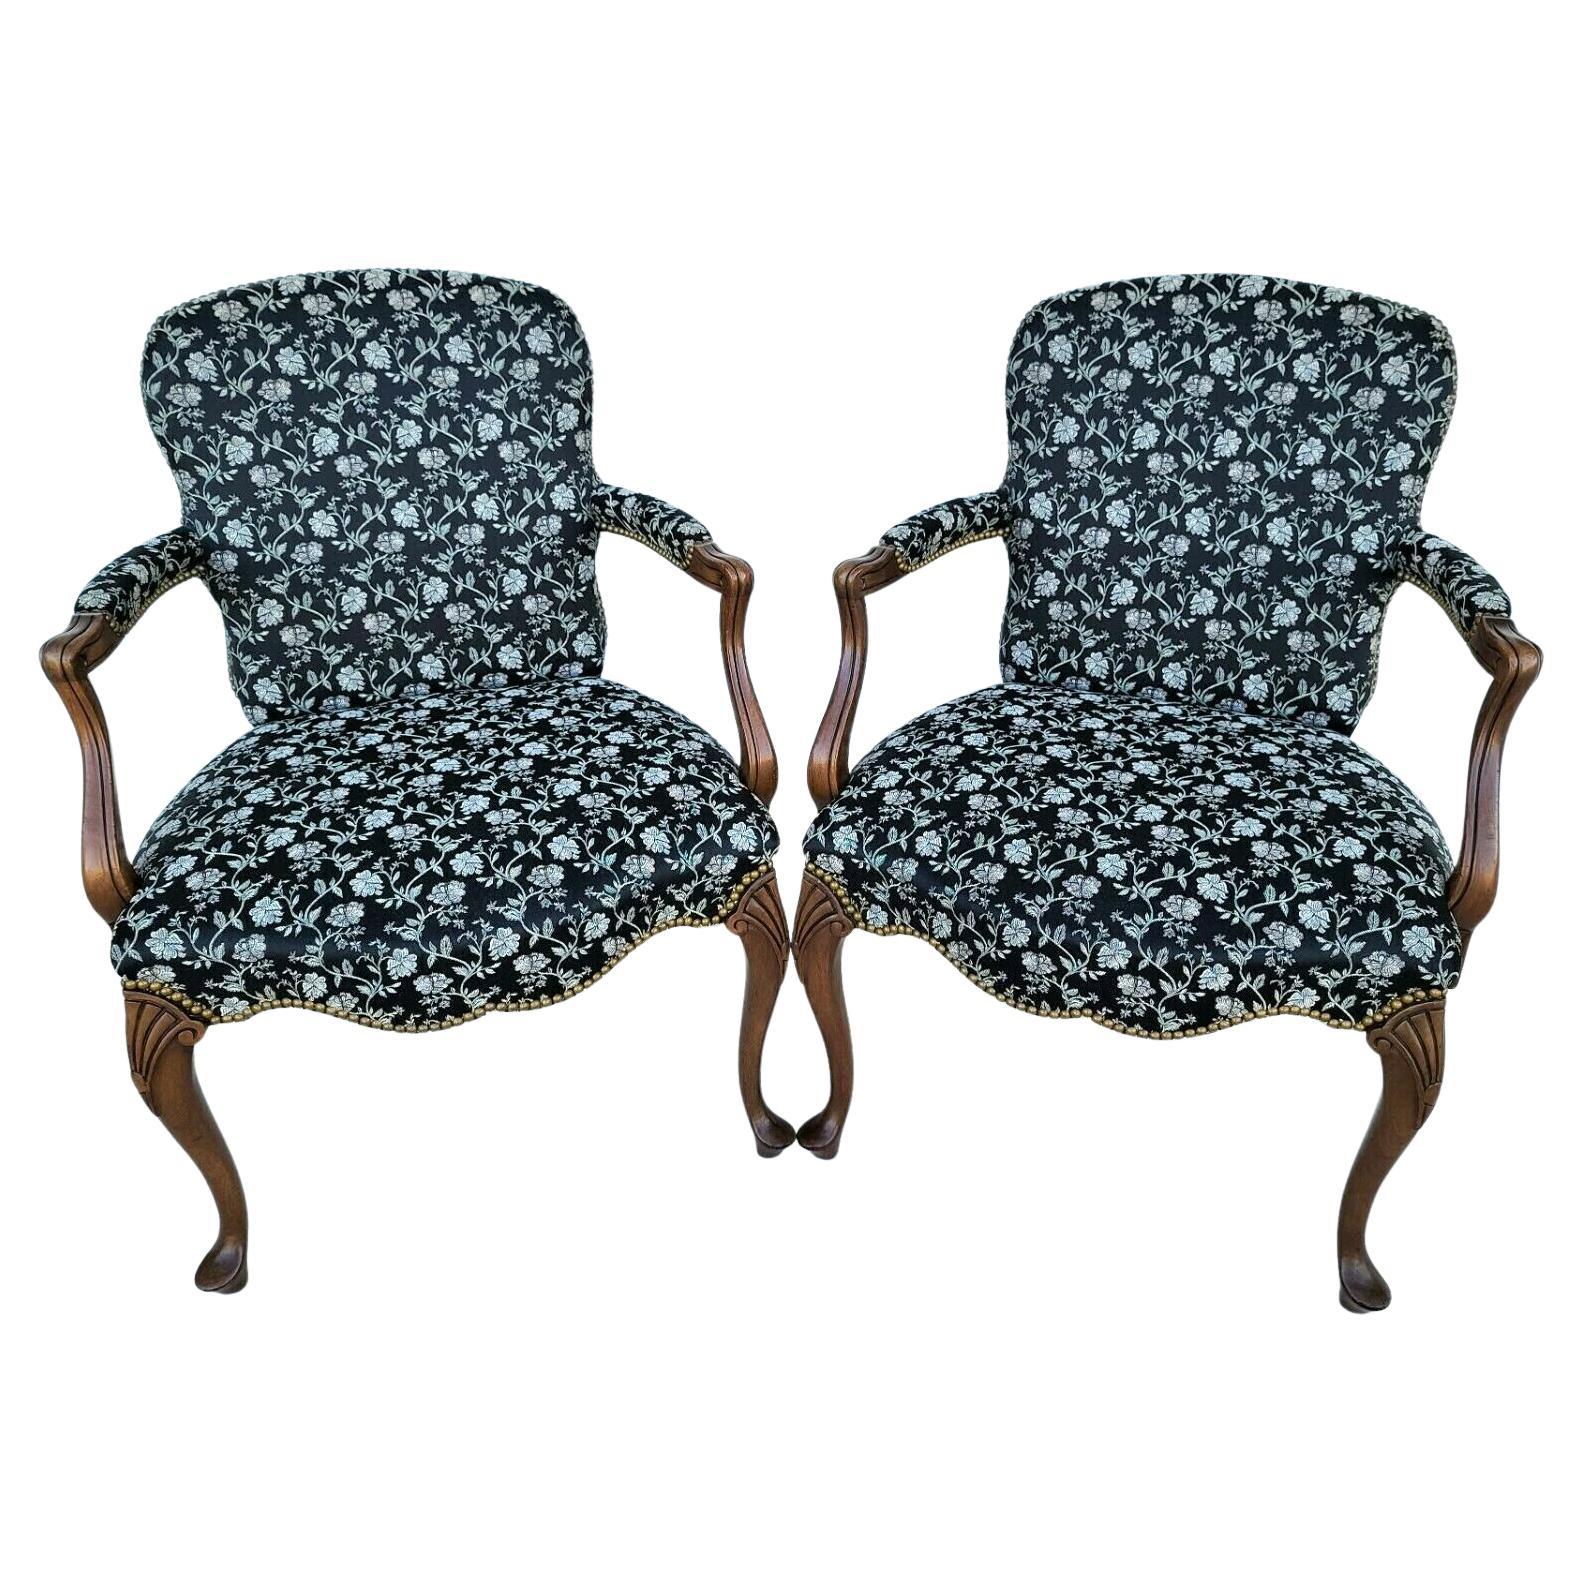 Vintage French Country Provincial Walnut Fauteuil Armchairs, a Pair